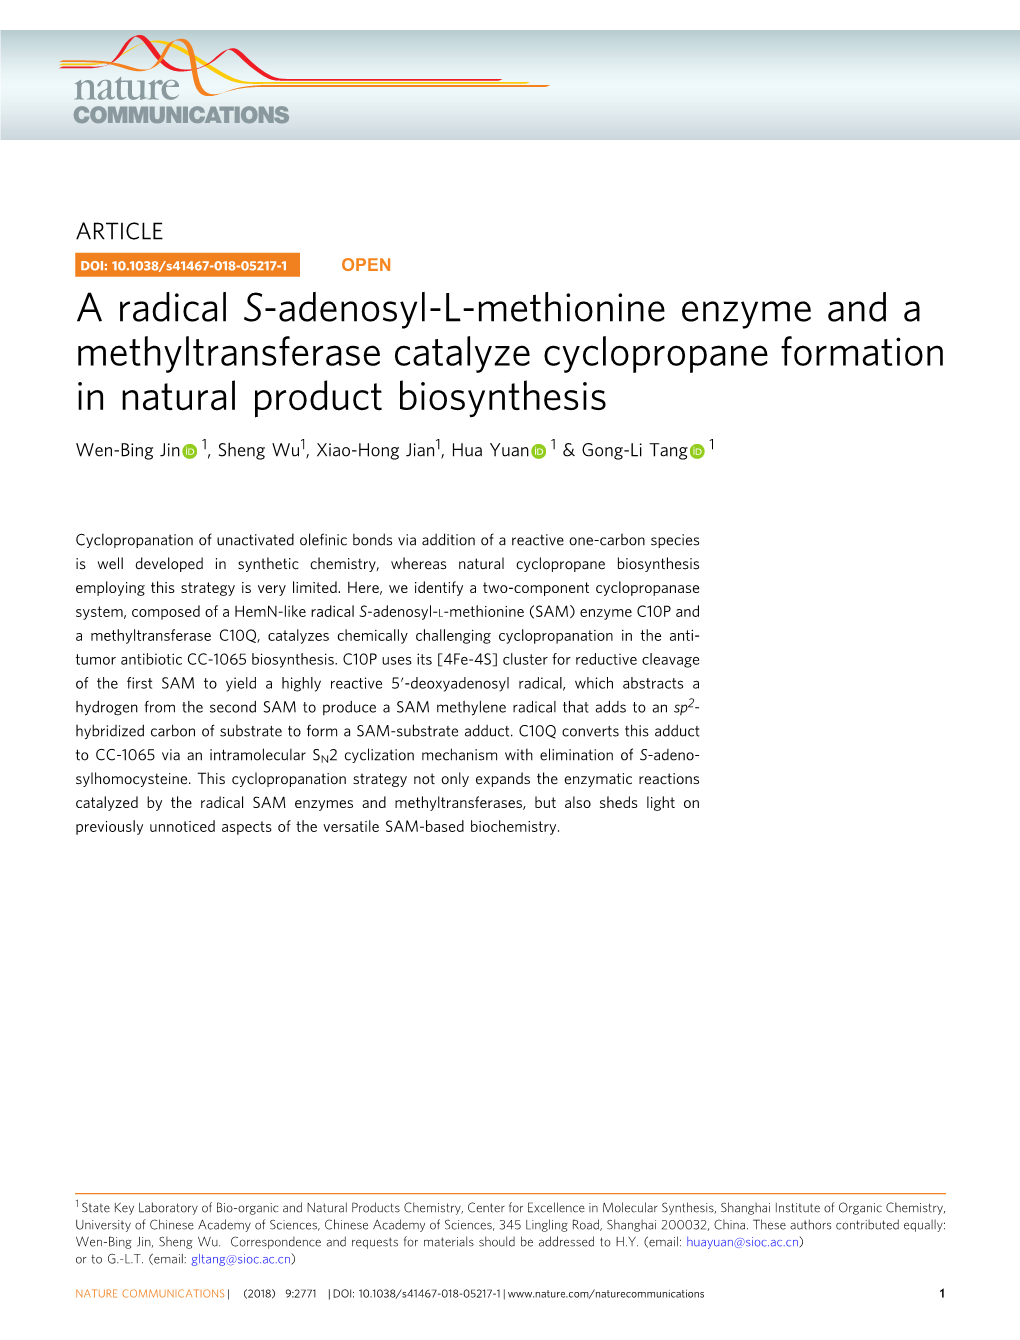 A Radical S-Adenosyl-L-Methionine Enzyme and a Methyltransferase Catalyze Cyclopropane Formation in Natural Product Biosynthesis